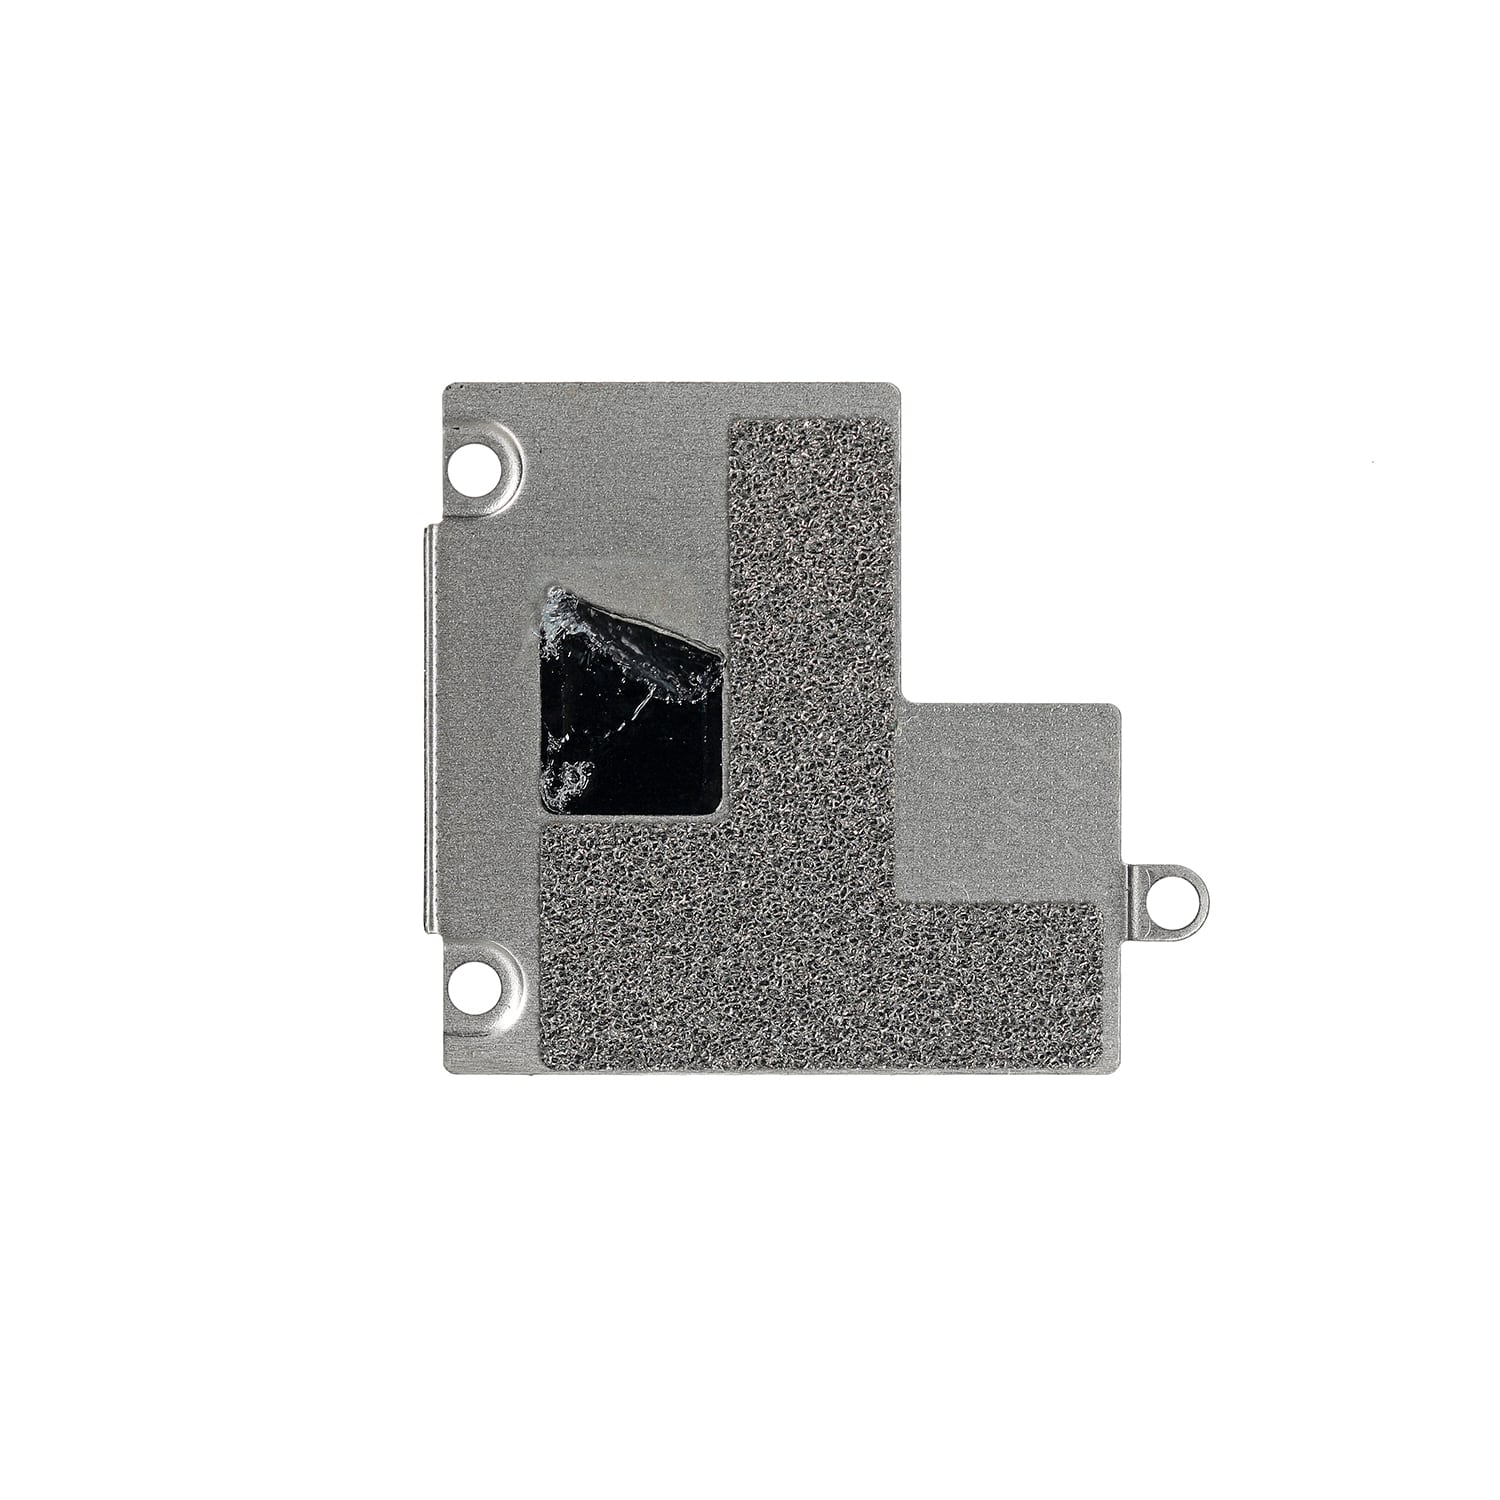 LCD PCB CONNECTOR RETAINING BRACKET FOR IPAD 5